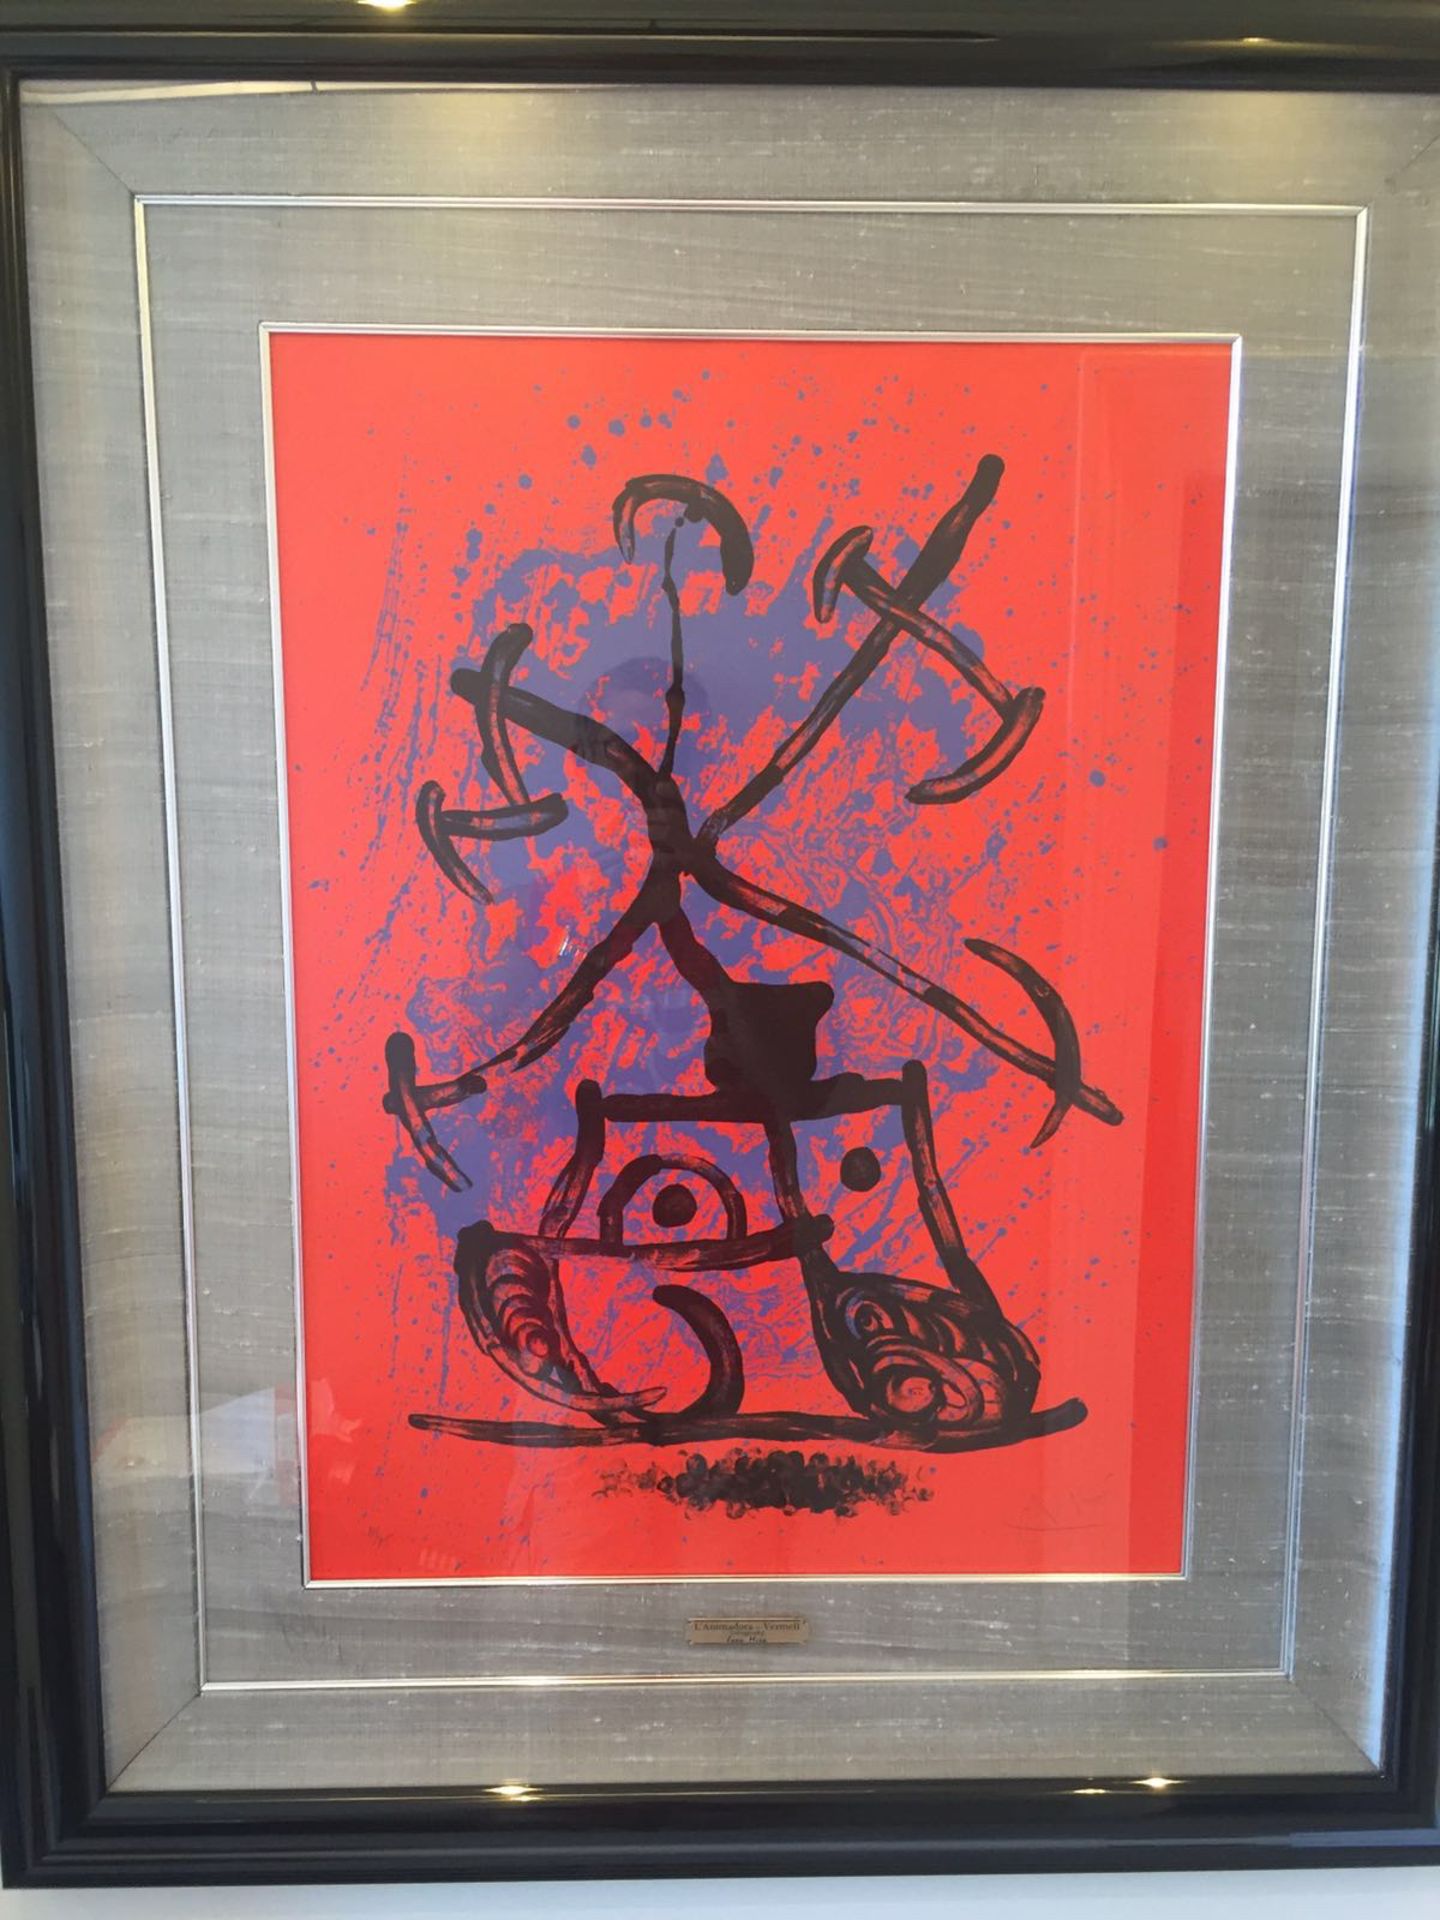 L'Animadora - Vermell by Miro (original Lithograph print number 10 of 75)